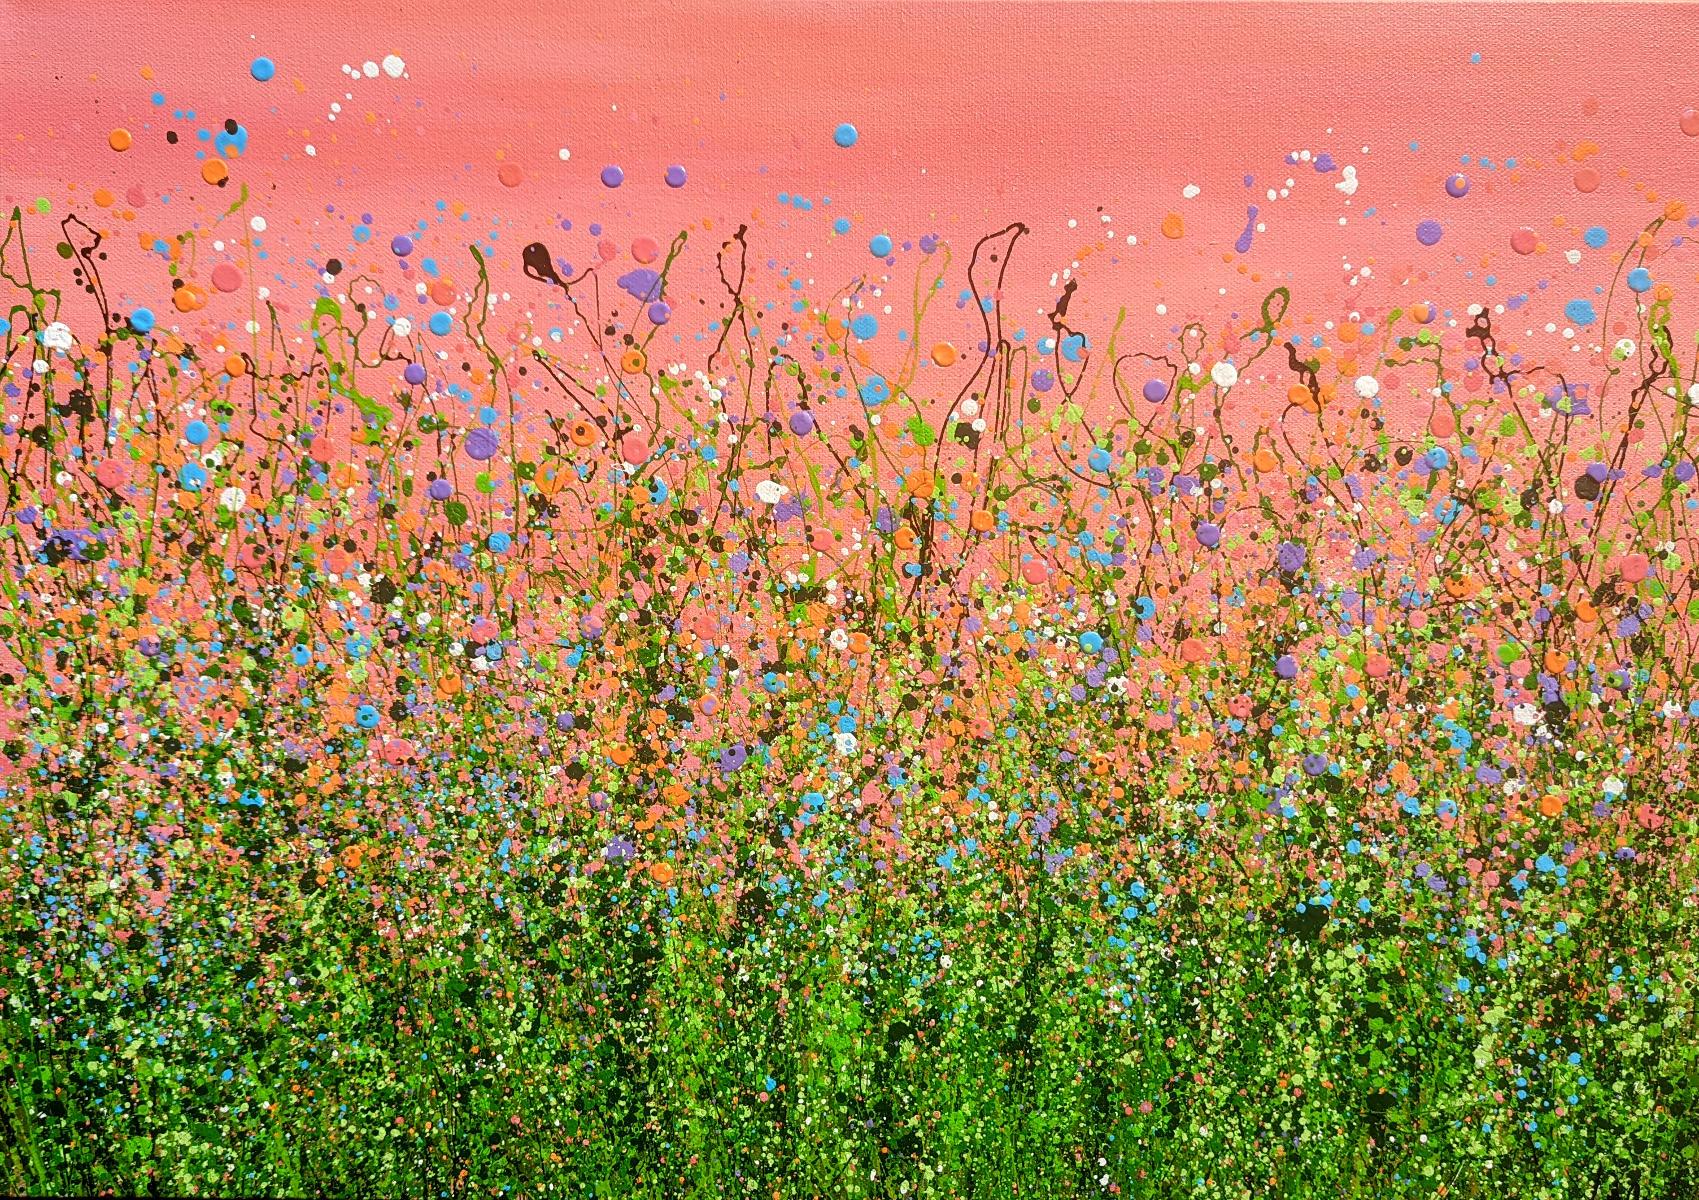 Lucy Moore  Landscape Painting - Flamingo Sky Meadows #5 by Lucy Moore, Floral, Wildflowers, Contemporary art